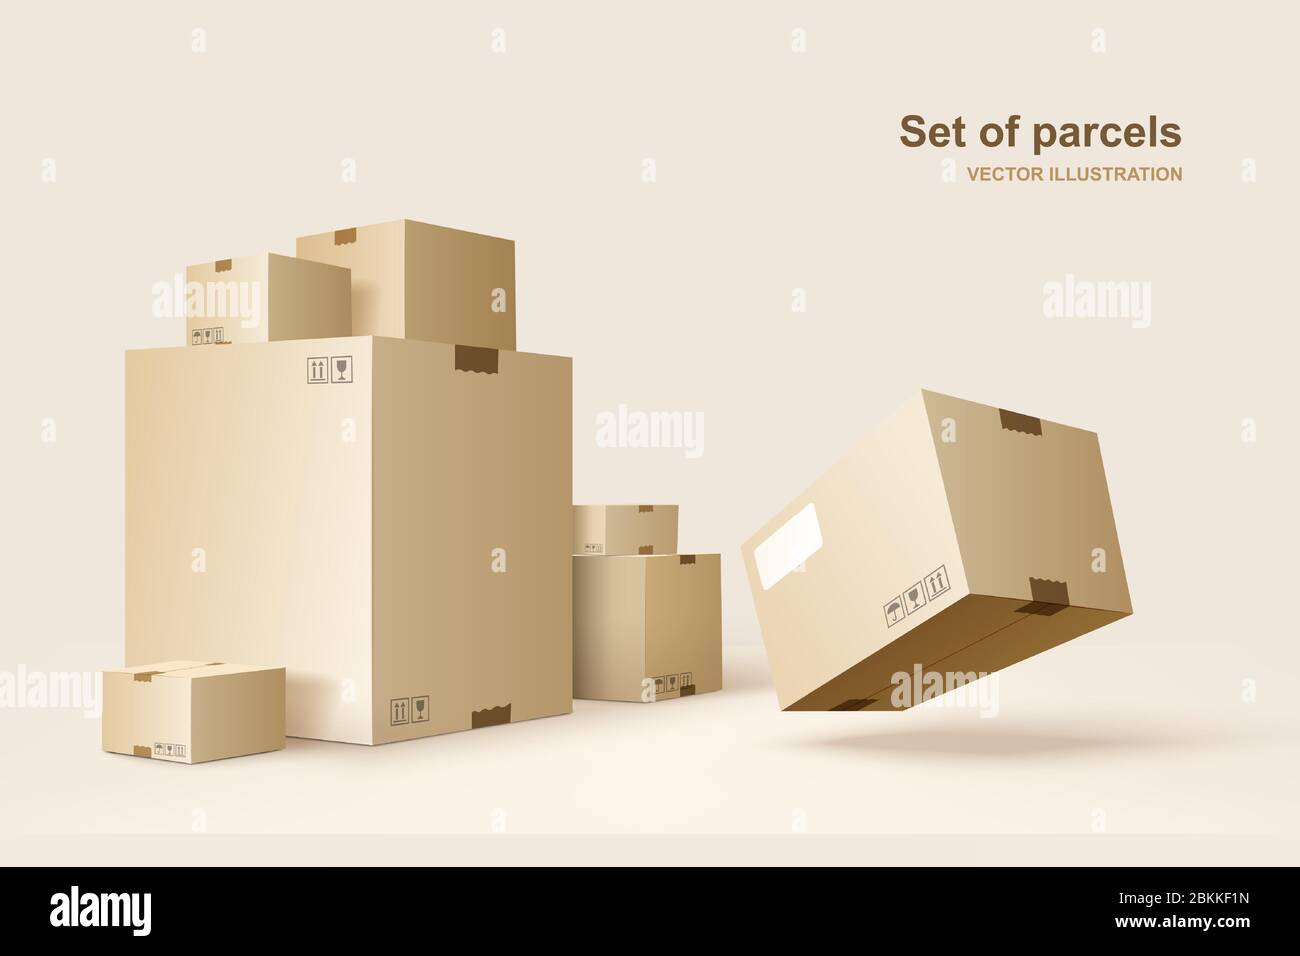 Template of packages. Cardboard boxes for packing and transportation of goods. Vector concept illustration. Stock Vector